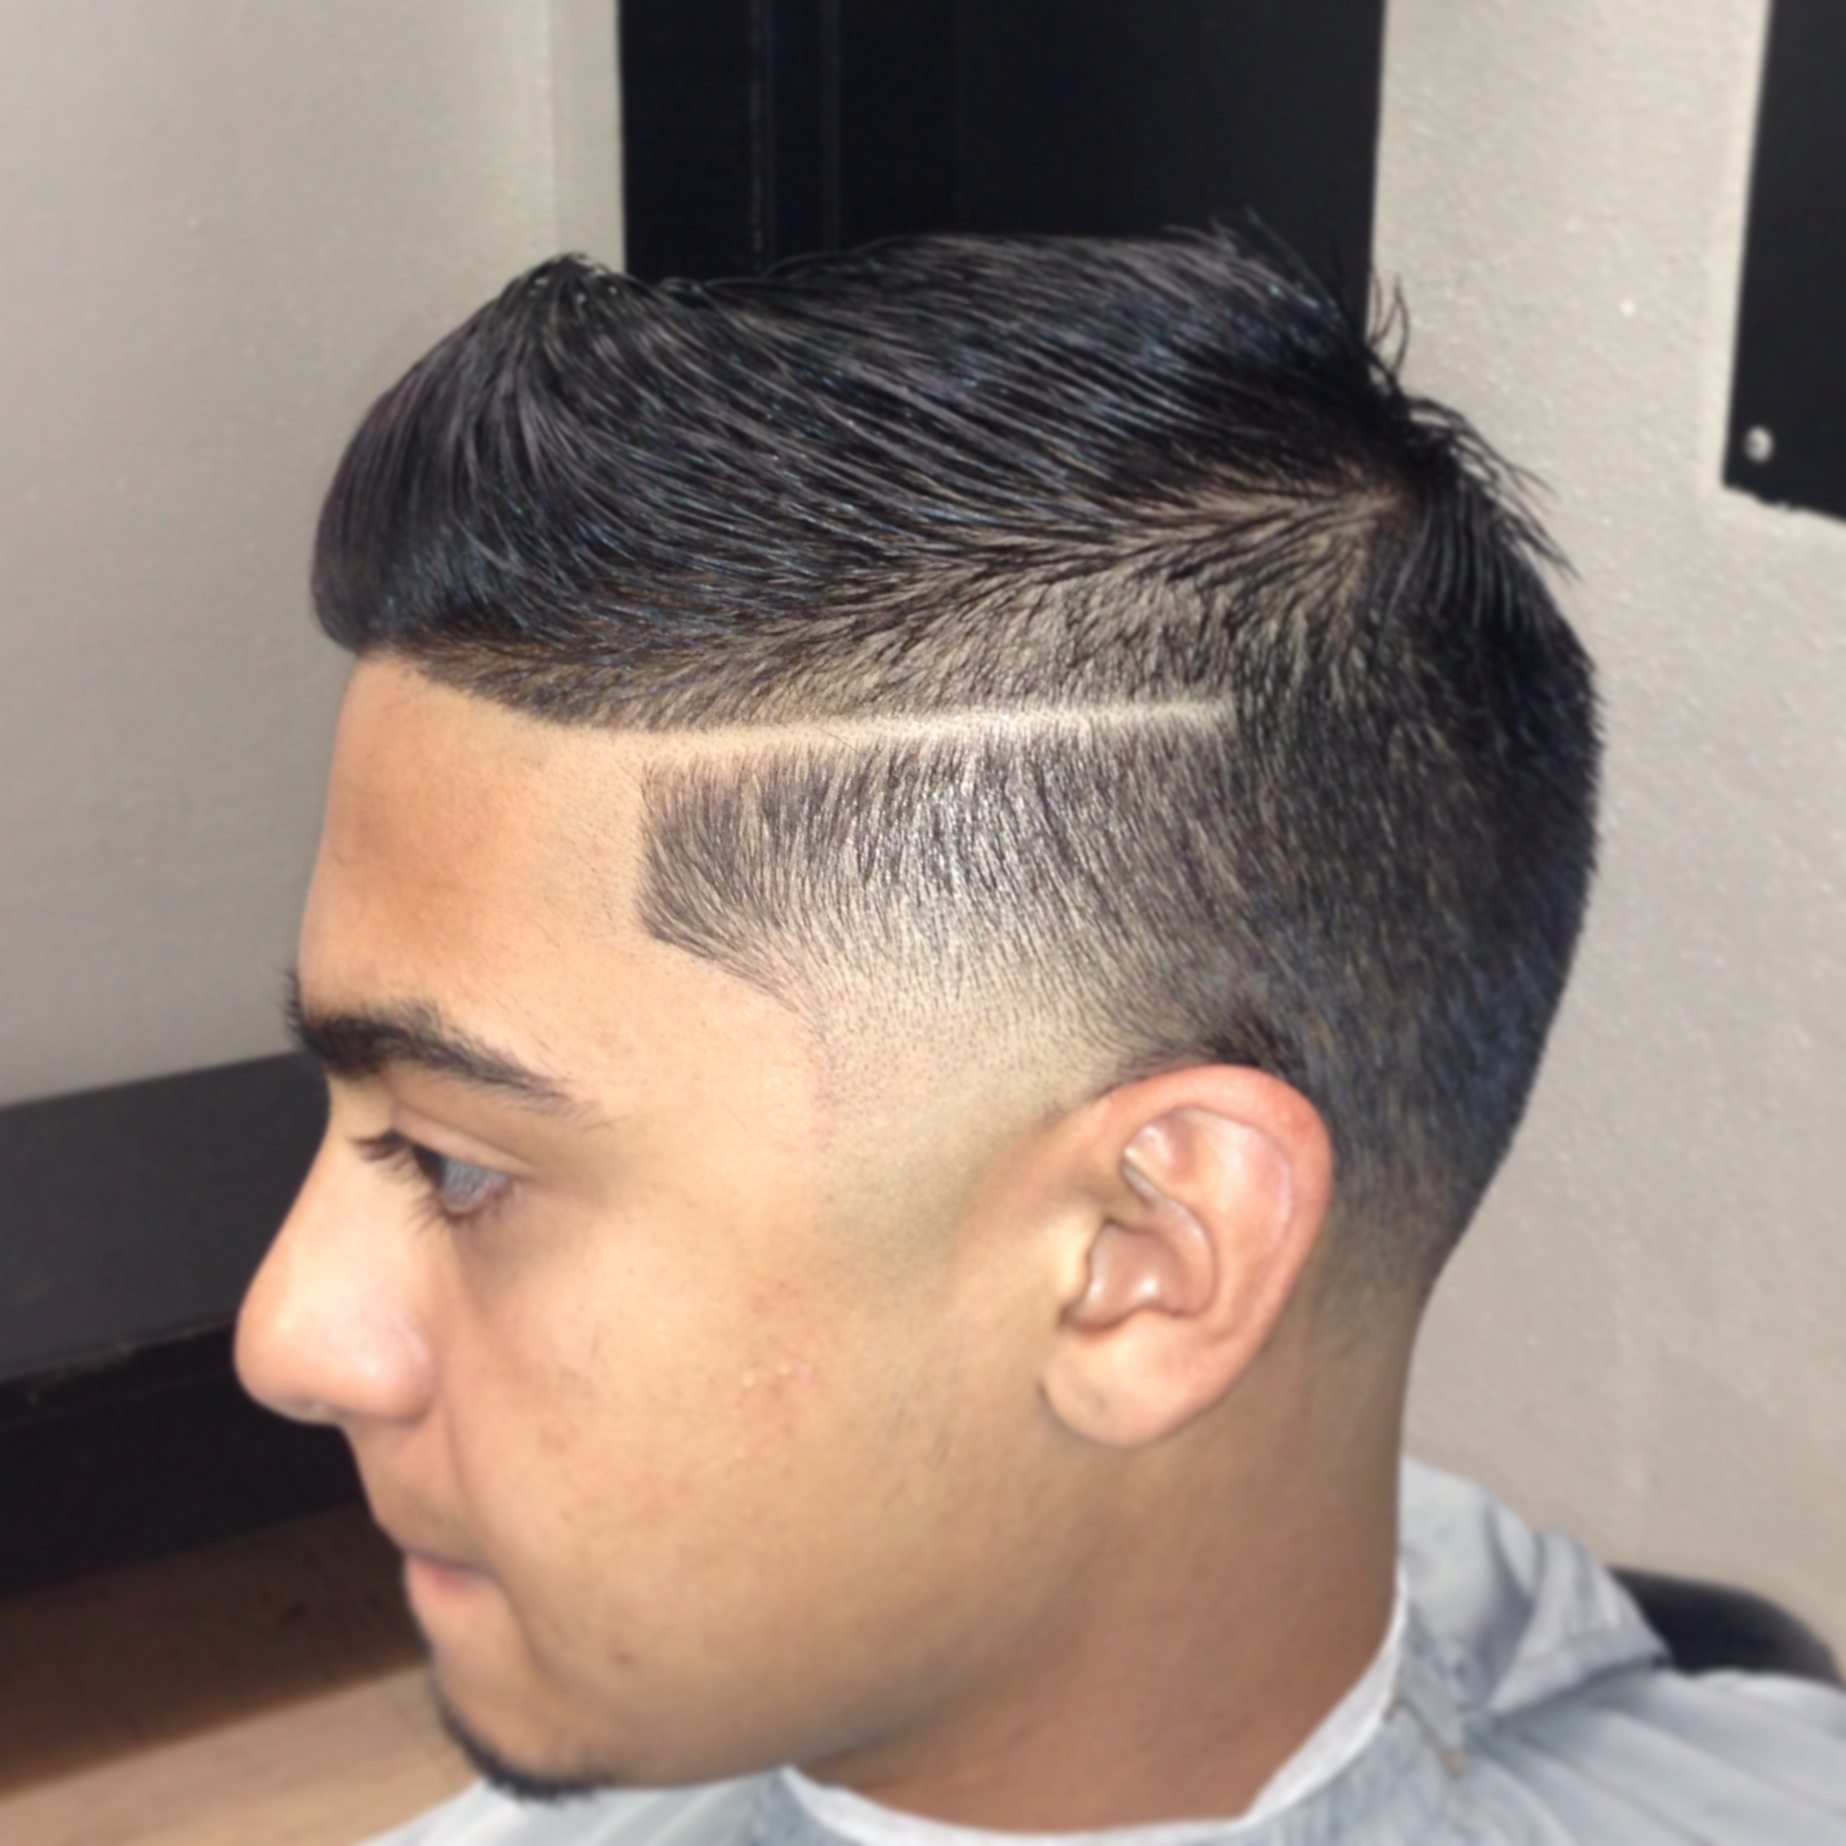 12 teen boy haircuts and hairstyles that are currently in vogue